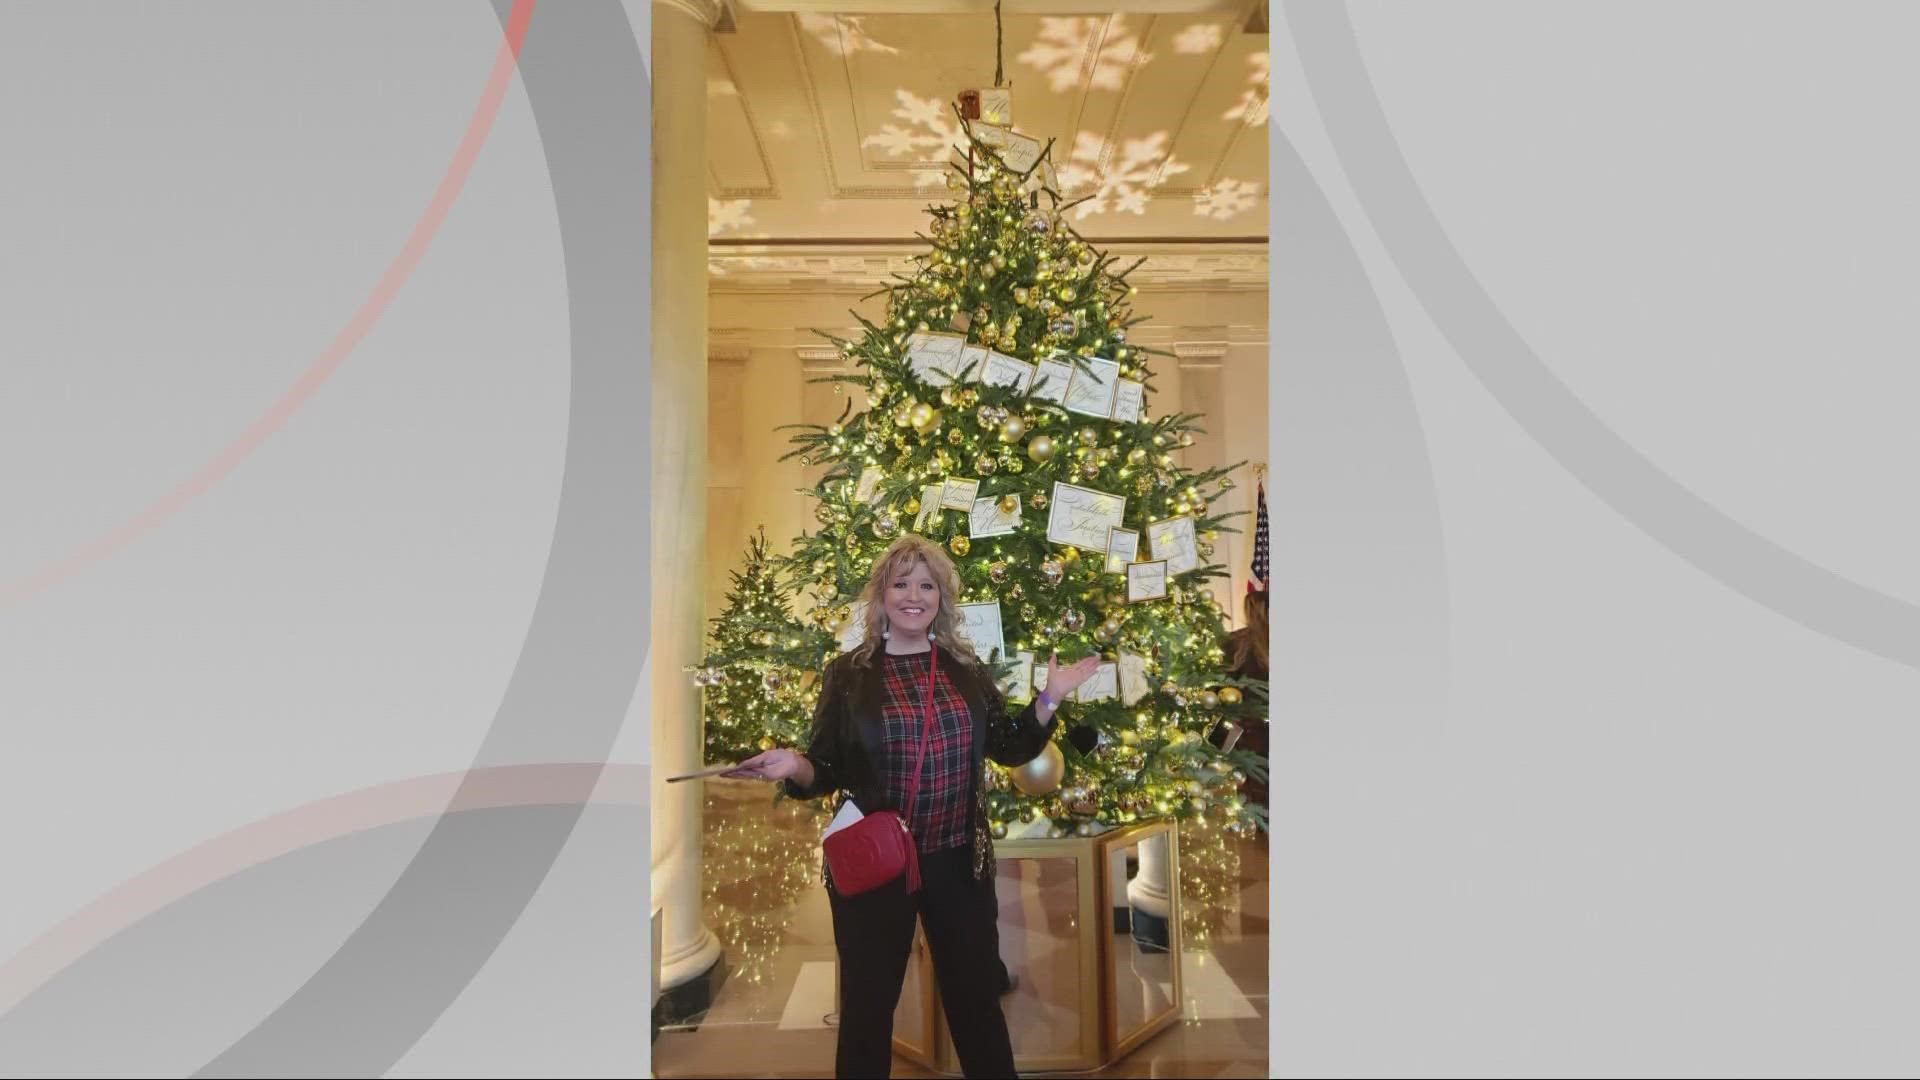 Jill Pangas of Copley was one of 150 volunteers to receive an invitation from First Lady Jill Biden to decorate the White House.